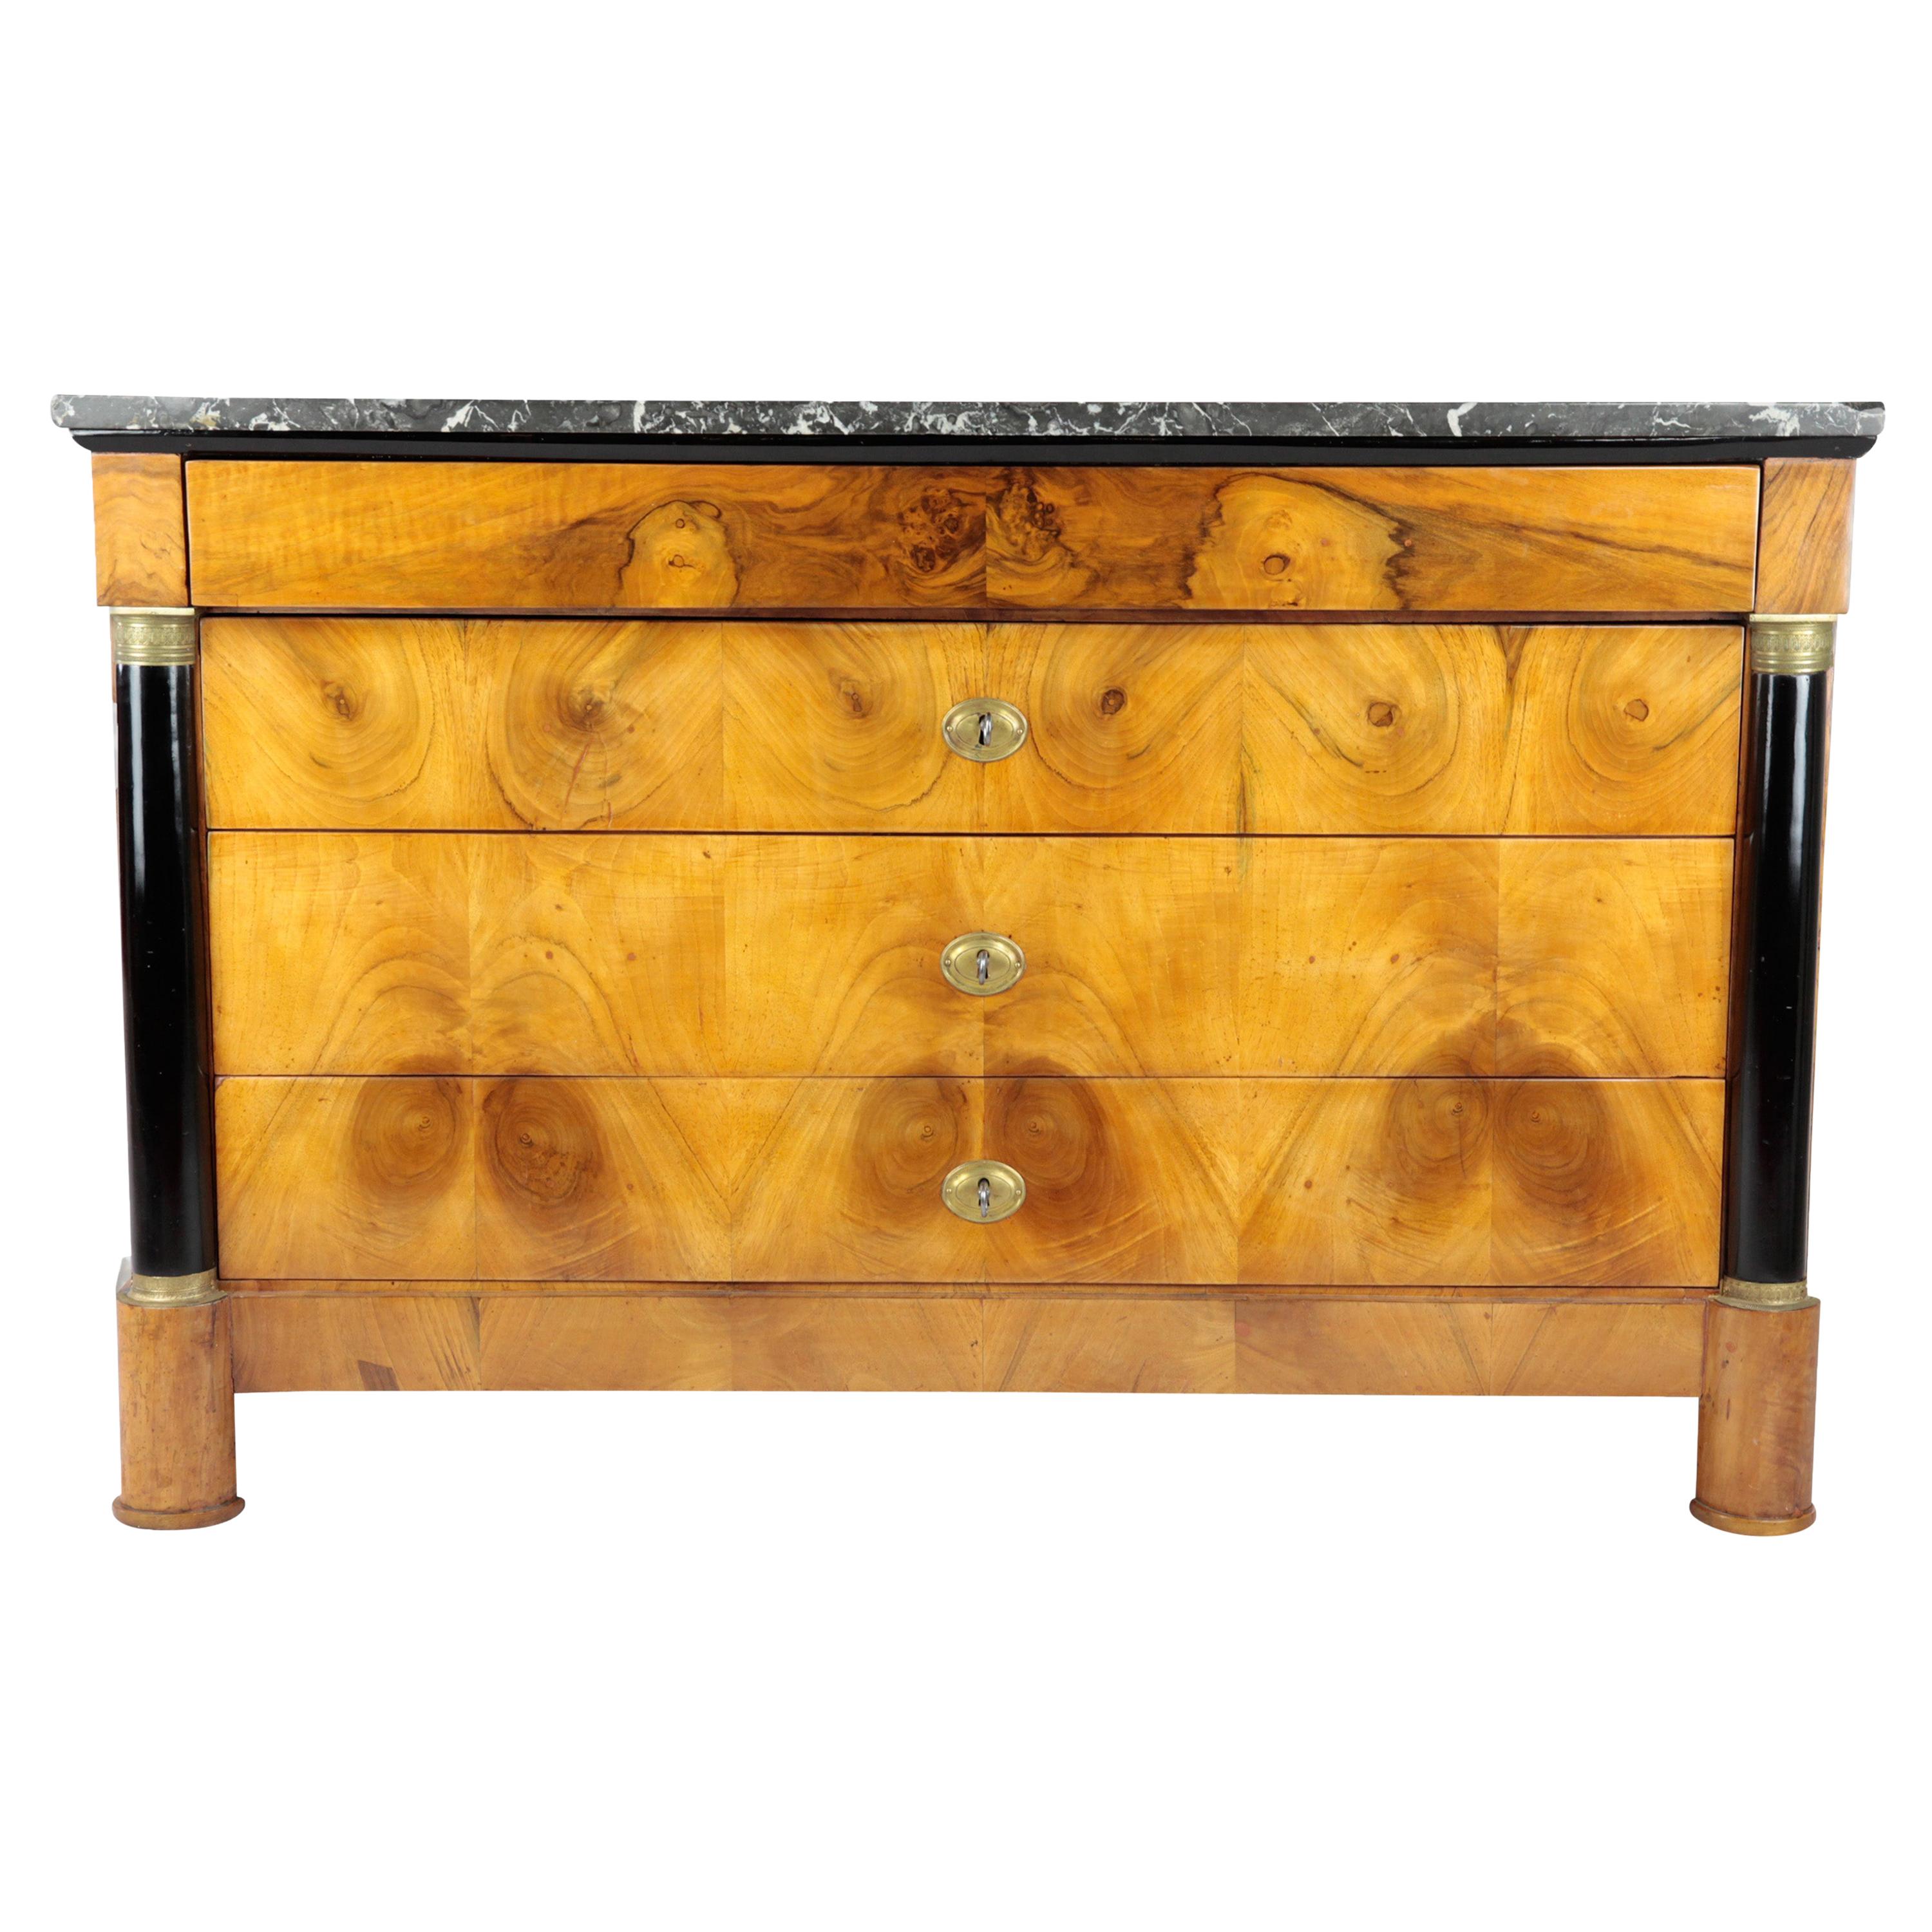 19th Century Biedermeier Period Chest of Drawers, France, Walnut, 1820, Brown For Sale